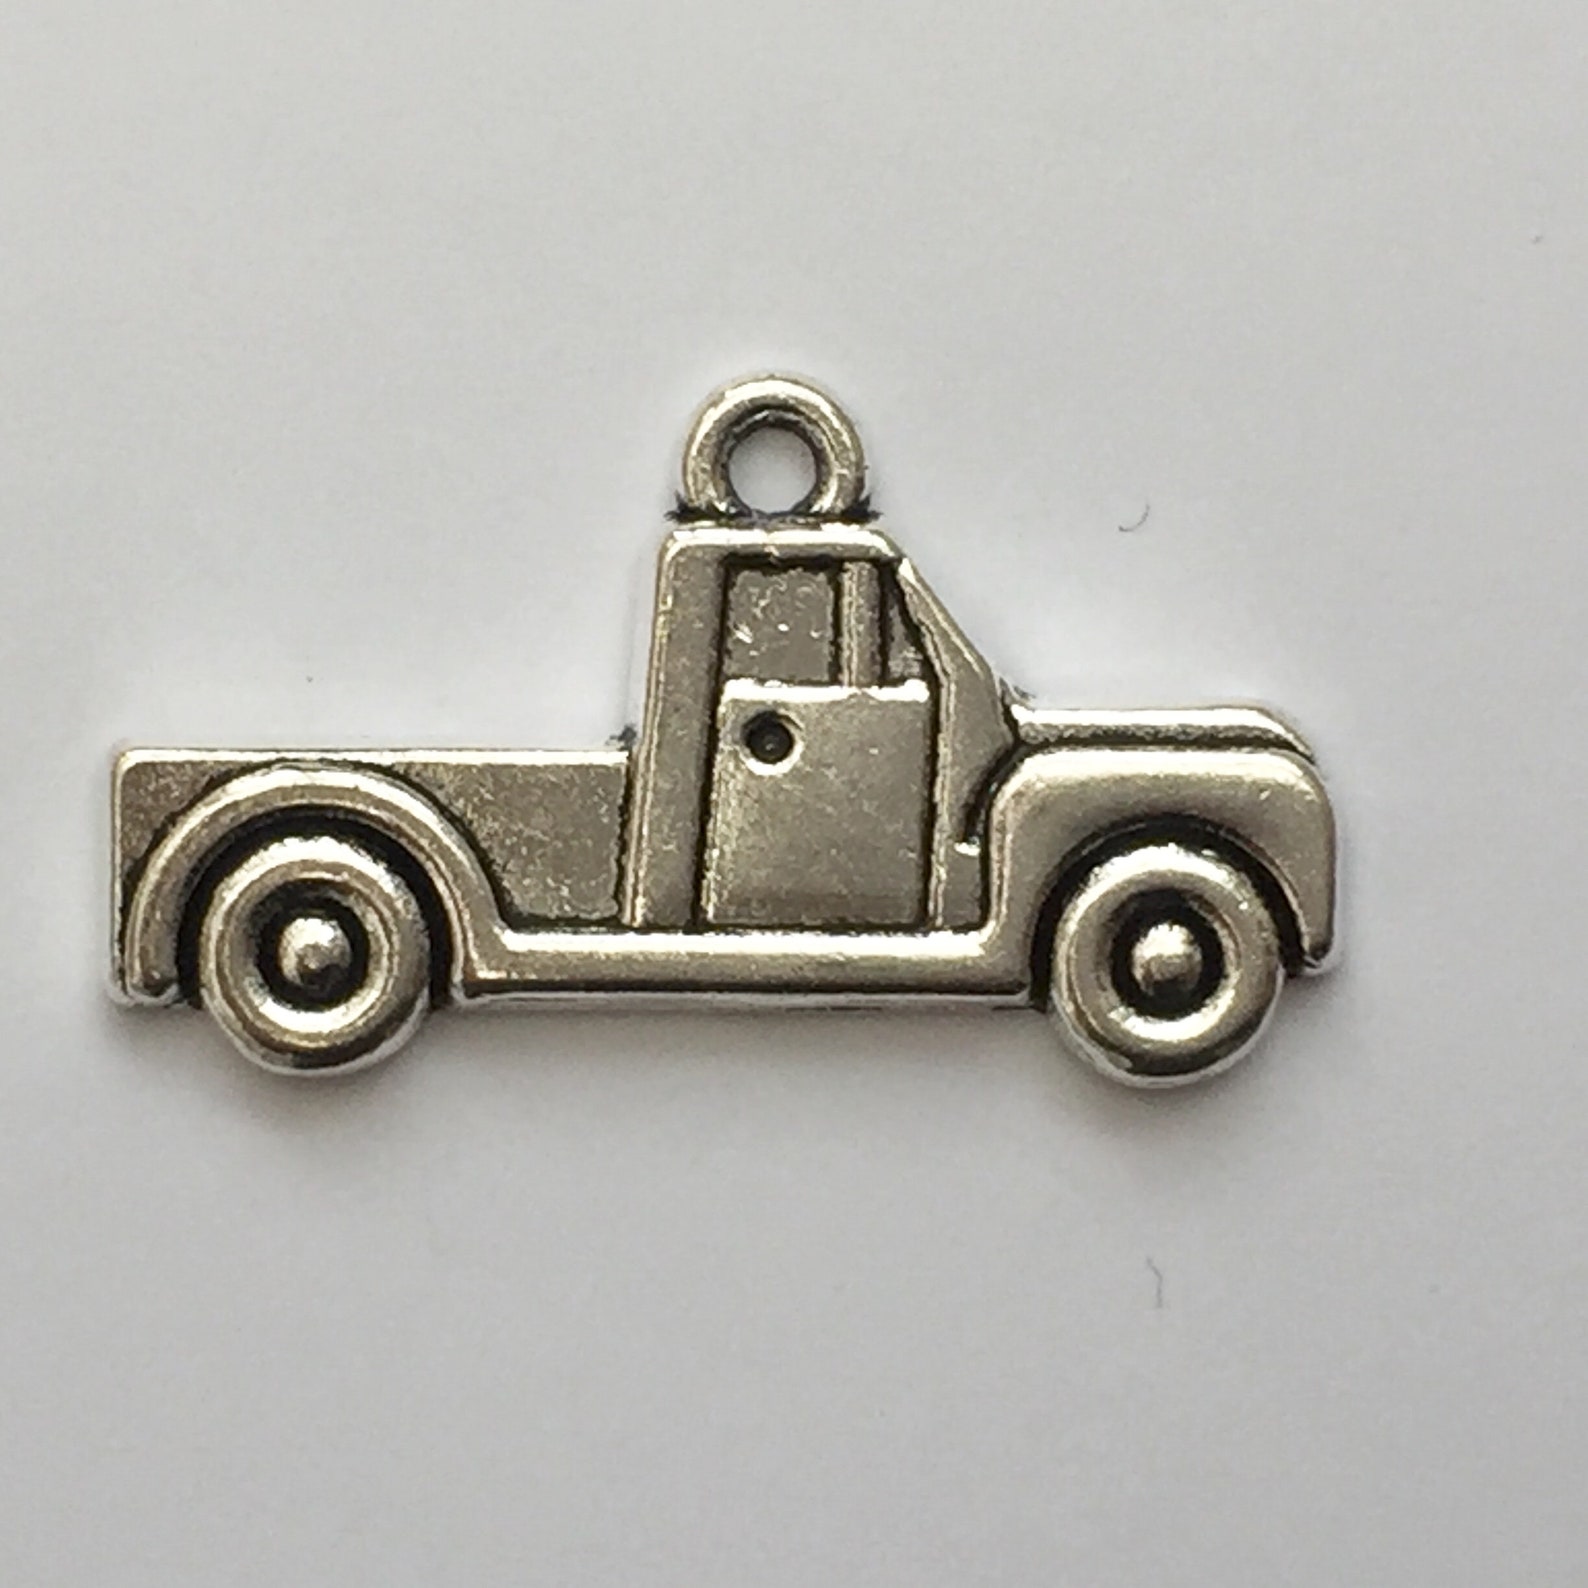 8 Truck Charms Antique Silver Tone SC1173 - Etsy